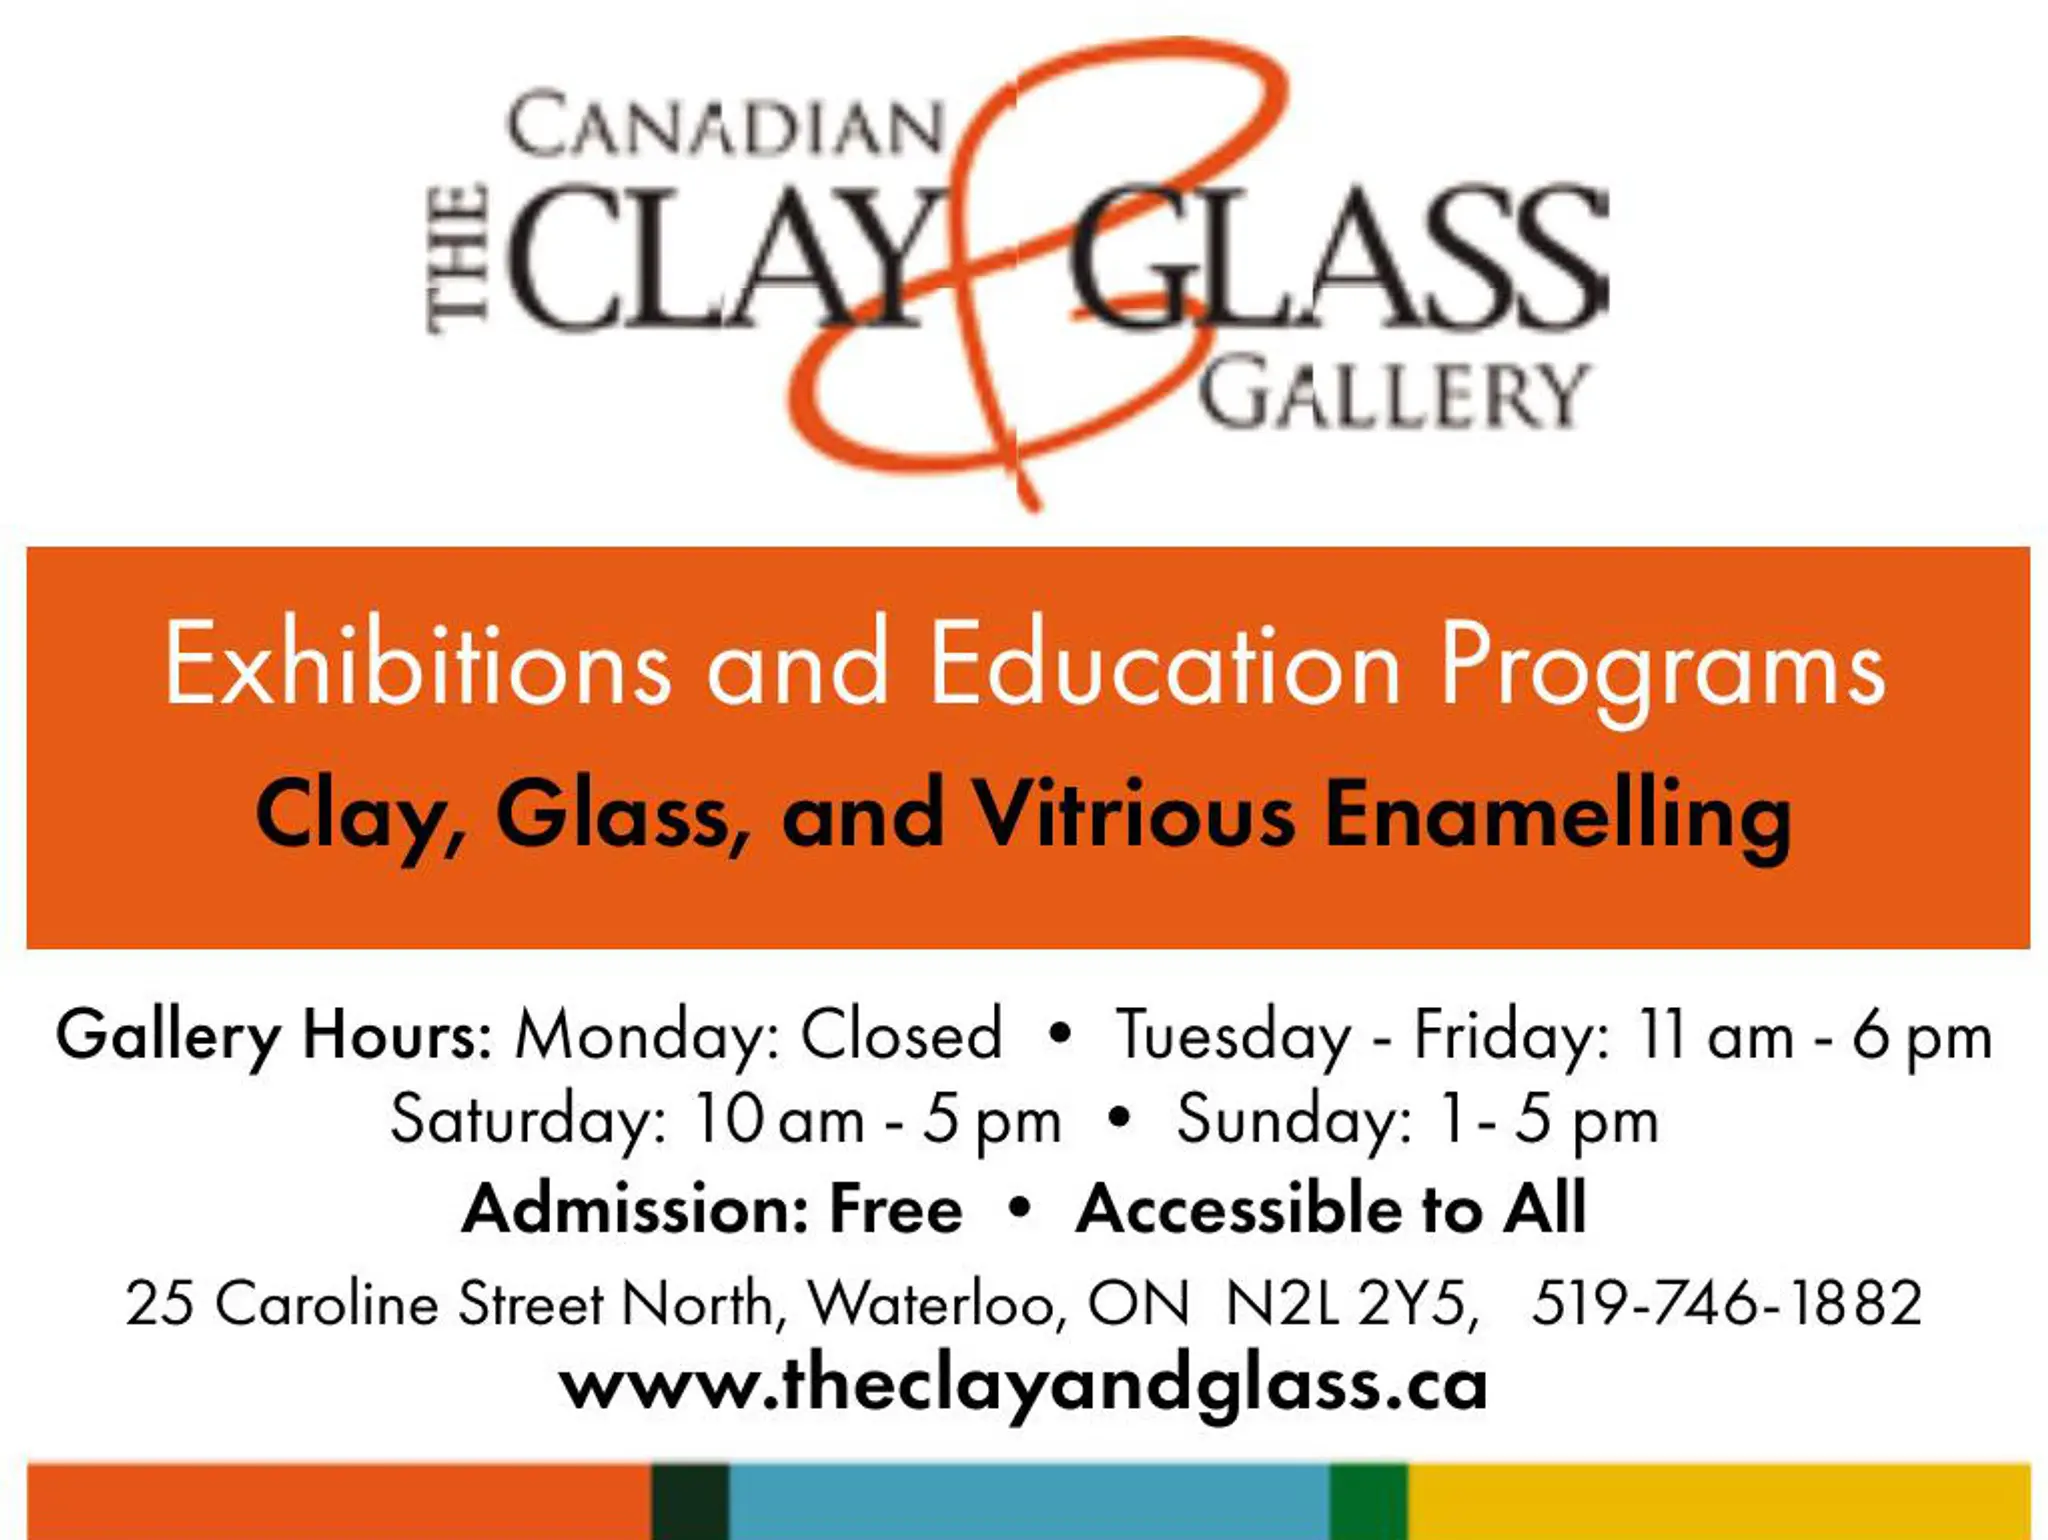 THE CLAY GLASS GALLERY